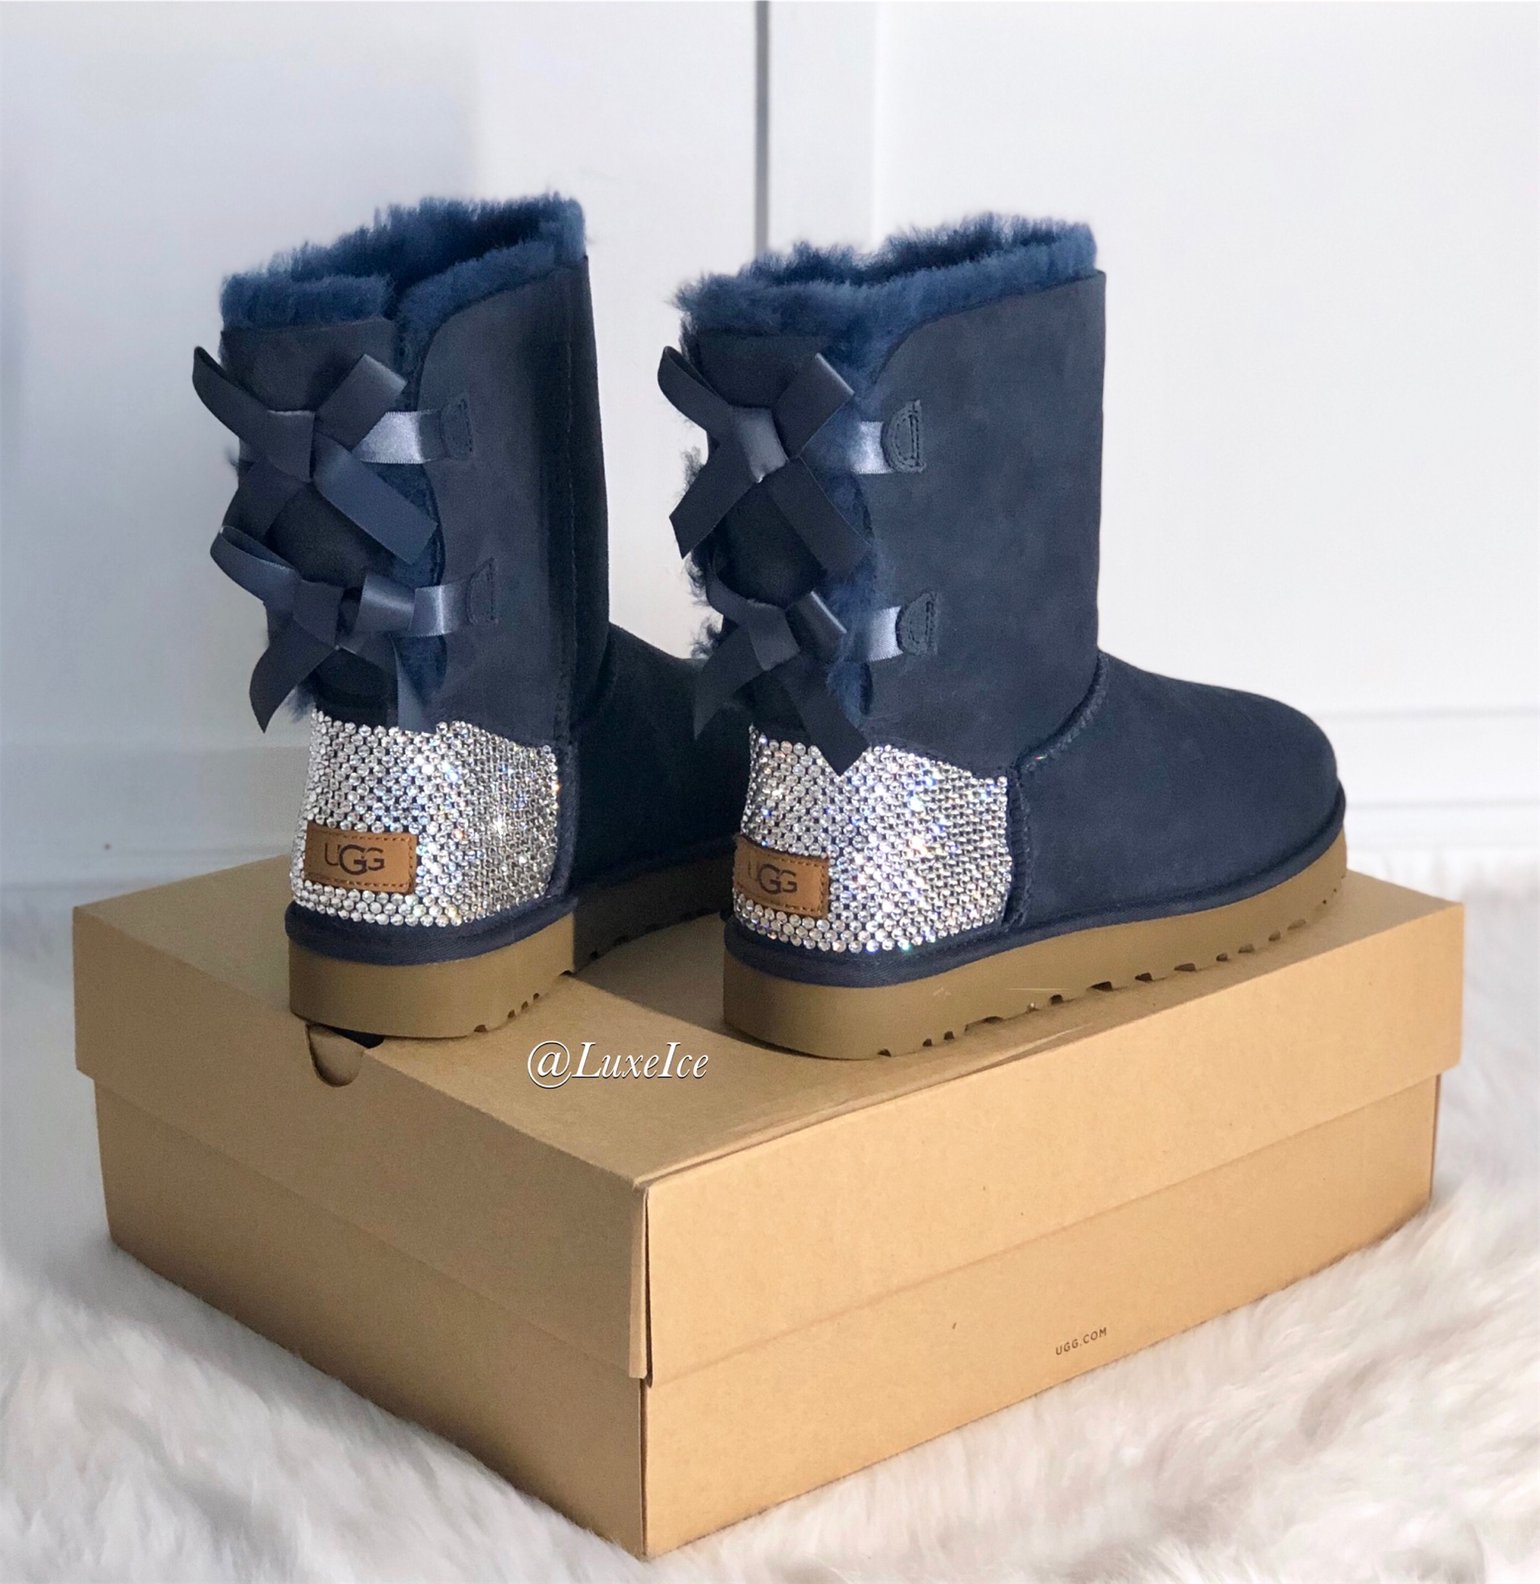 Ugg Boots customized with Swarovski Crystals.